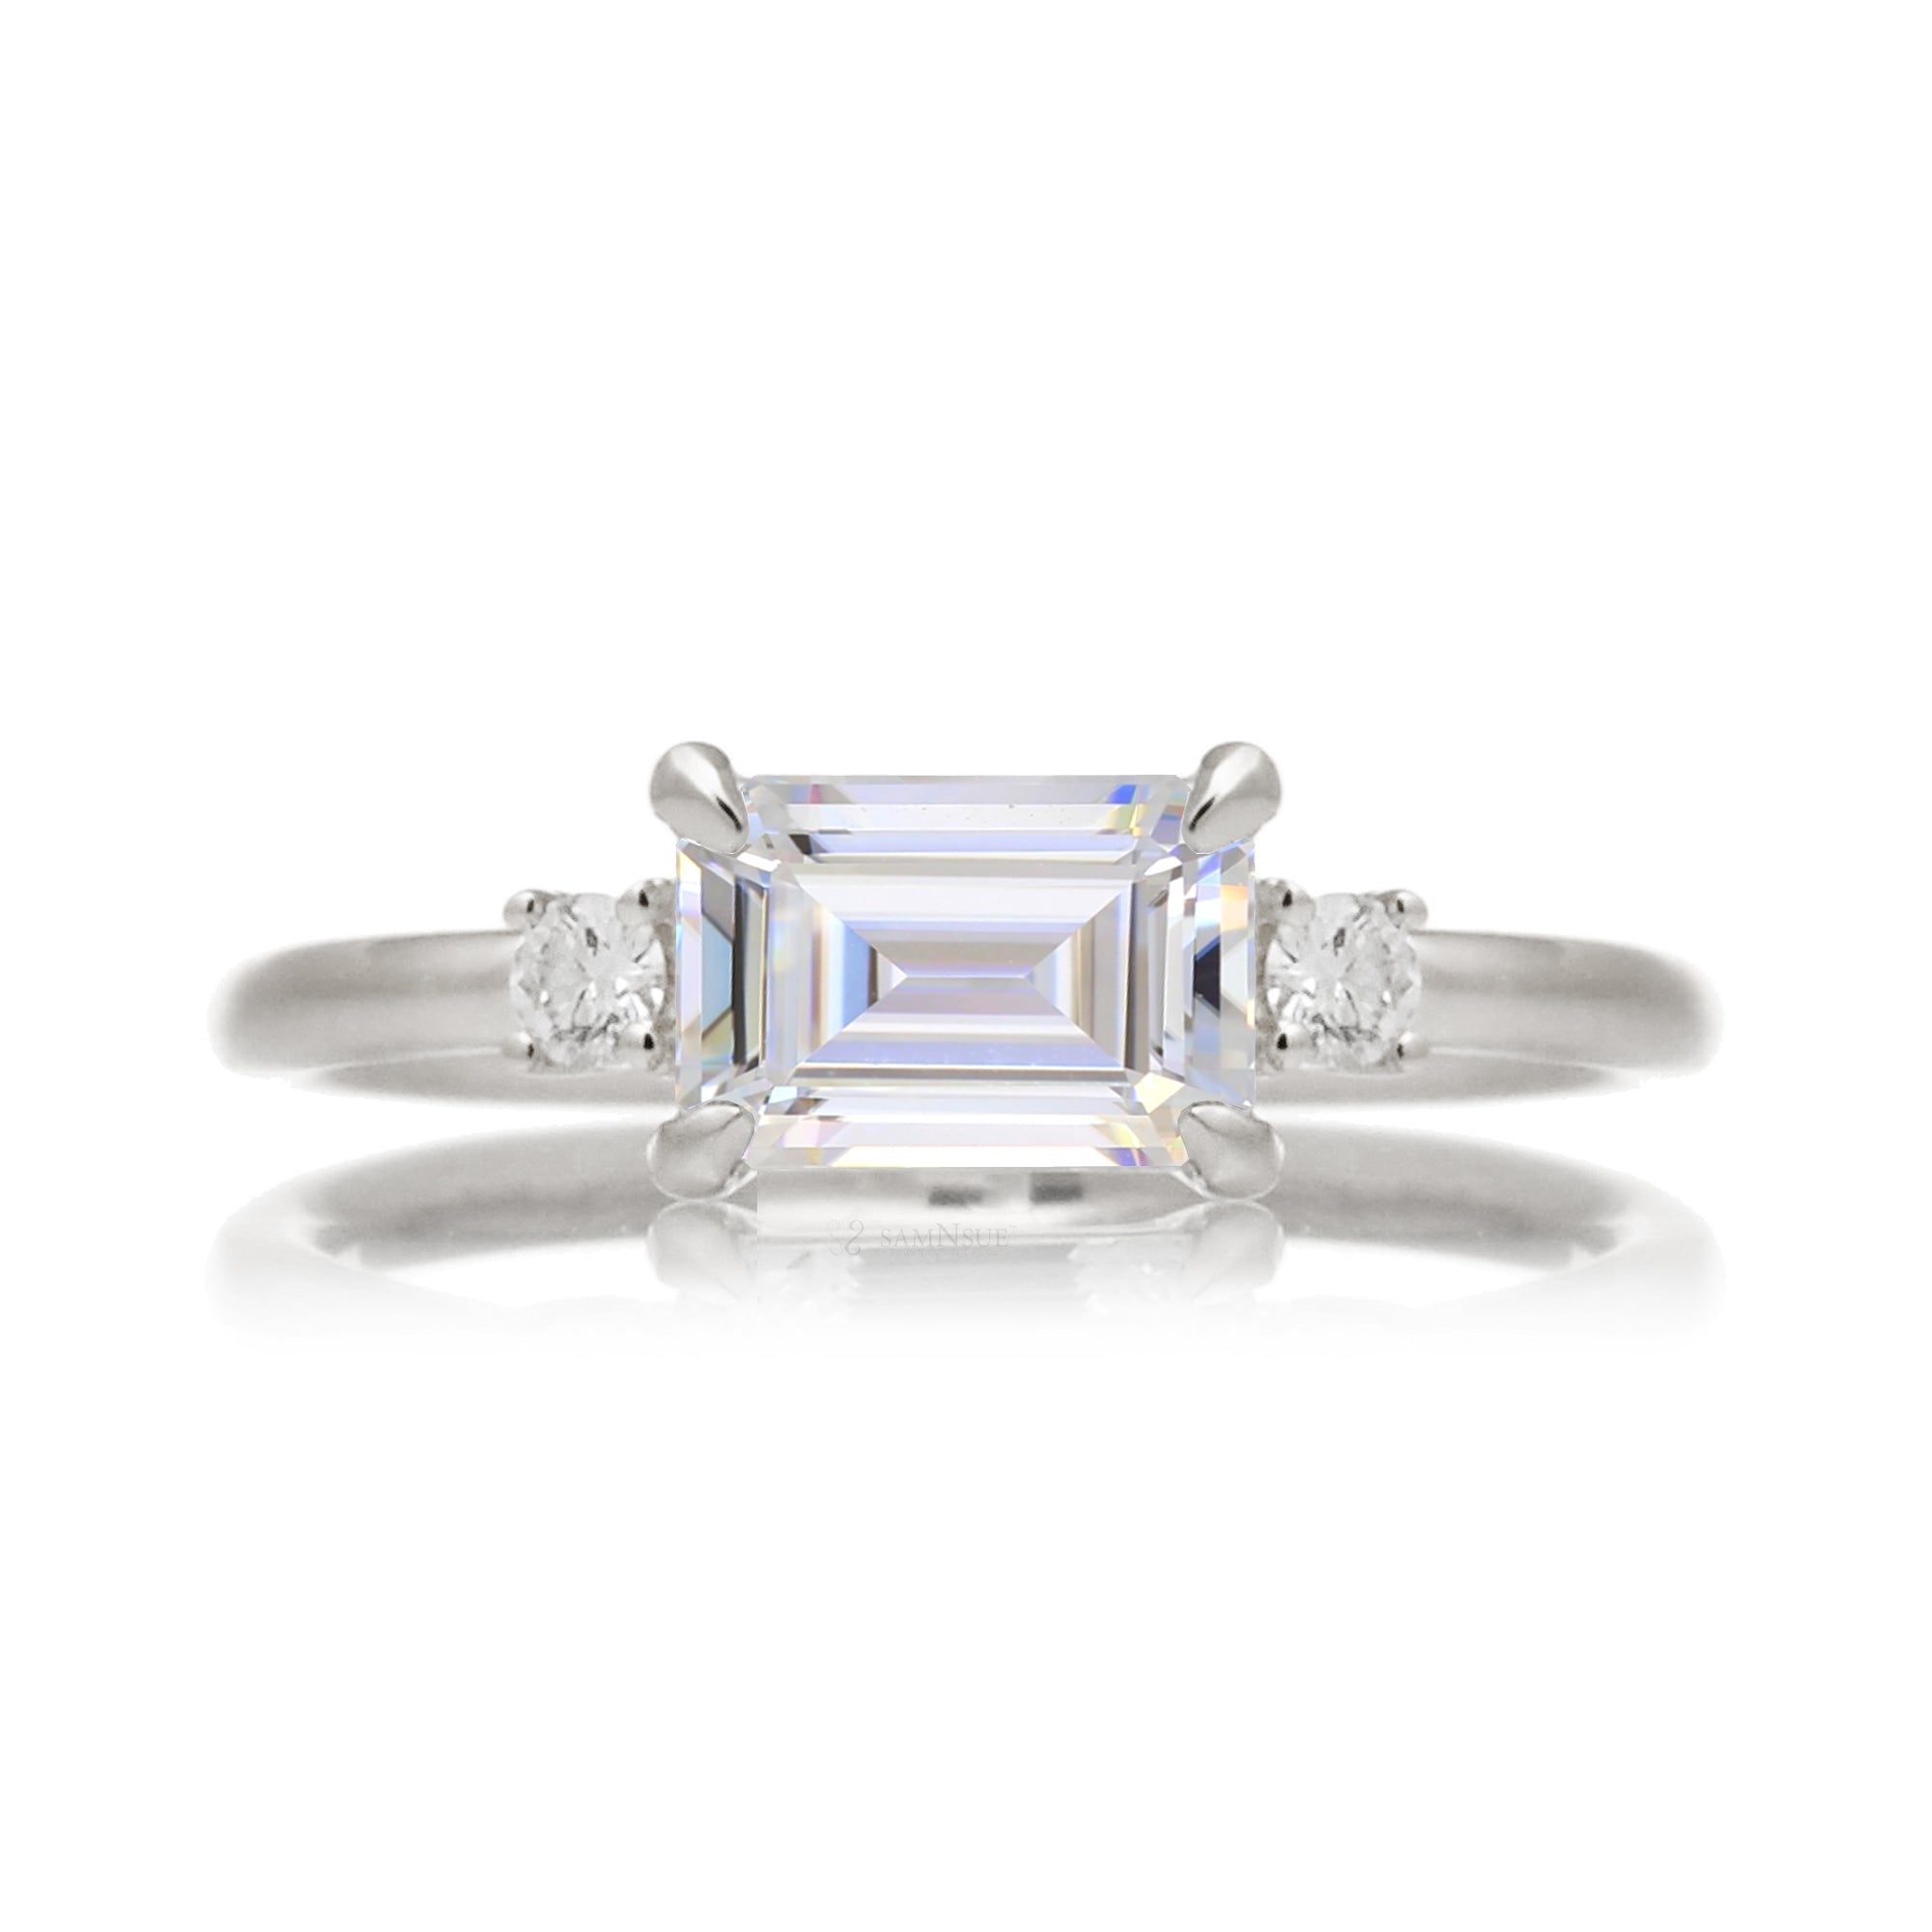 Emerald step cut moissanite three stone east-west ring the Lena white gold